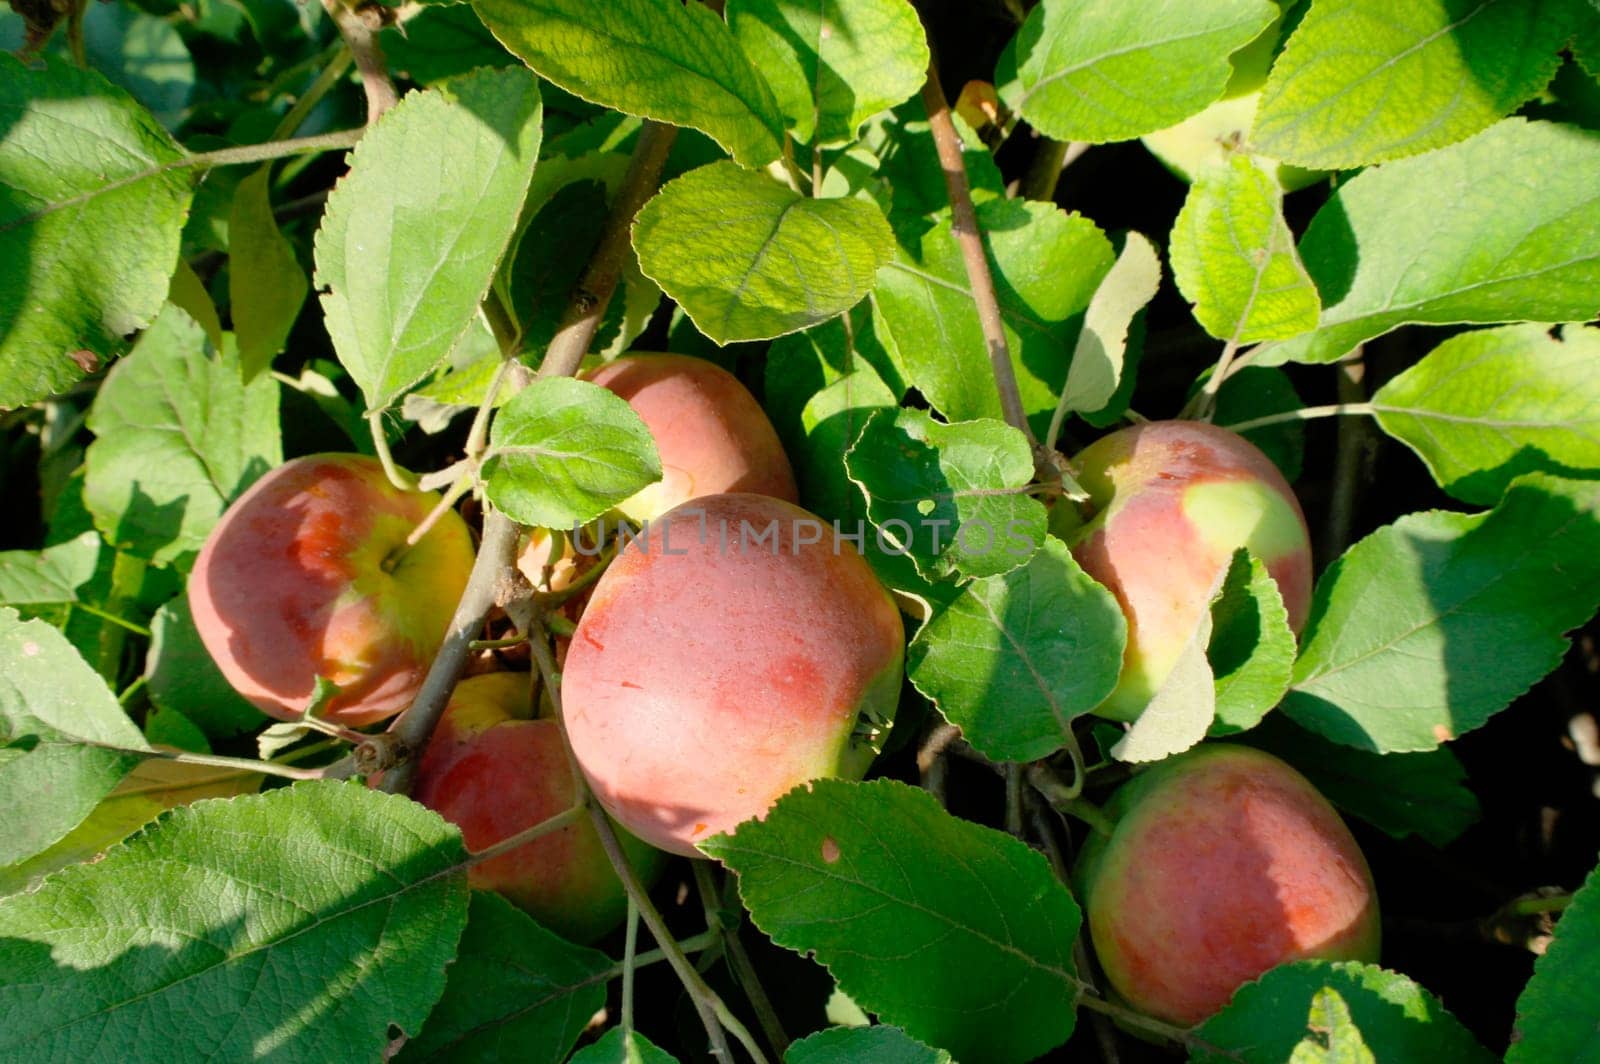 Colorful outdoor shot containing a bunch of red apples on a branch ready to be harvested